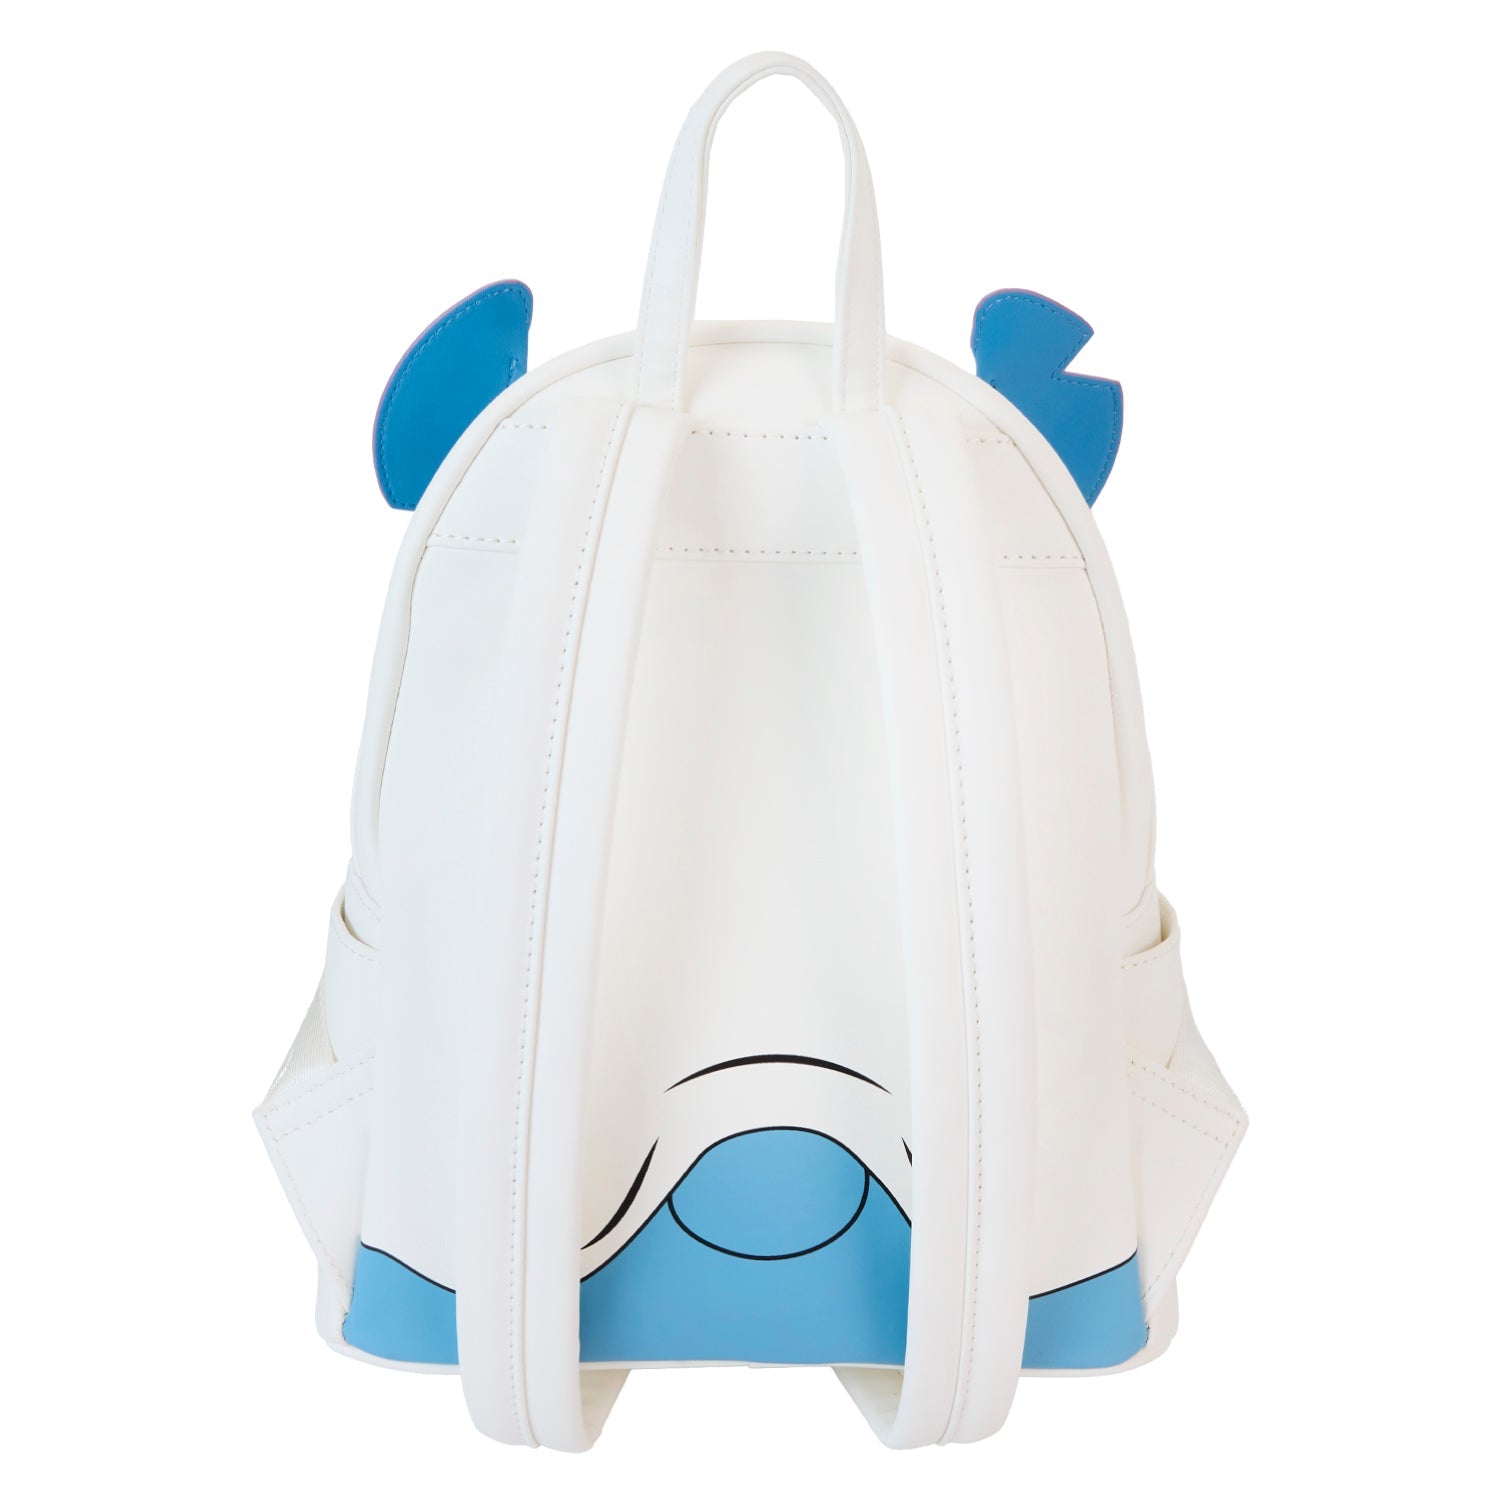 Loungefly x Disney Stitch Ghost Cosplay Mini Backpack - GeekCore